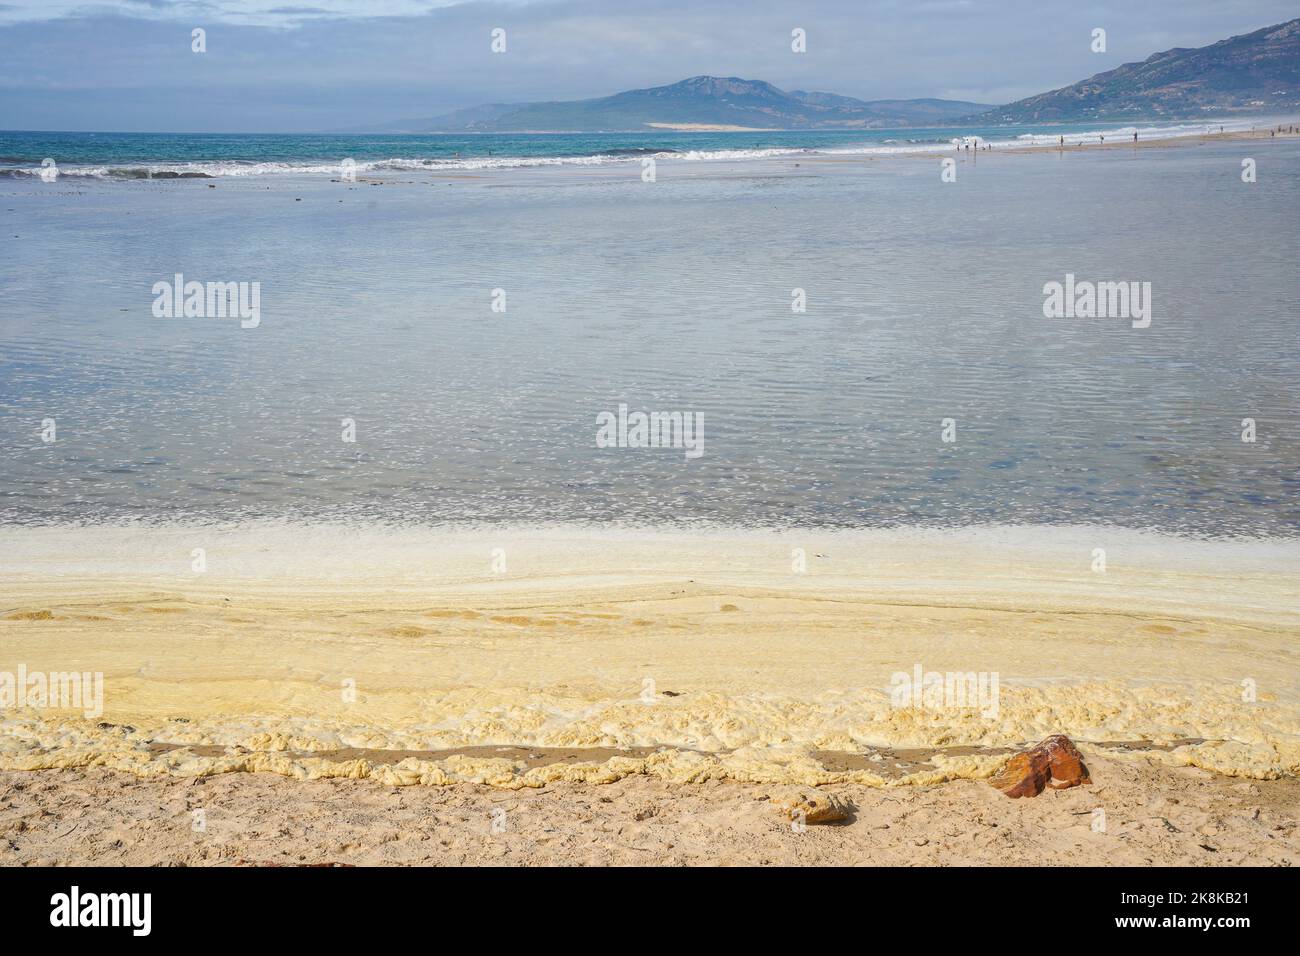 Sea foam washed up or blown onto a beach due to spillage of petroleum, pollution at Tarifa Beach, Andalucia, Spain. Stock Photo